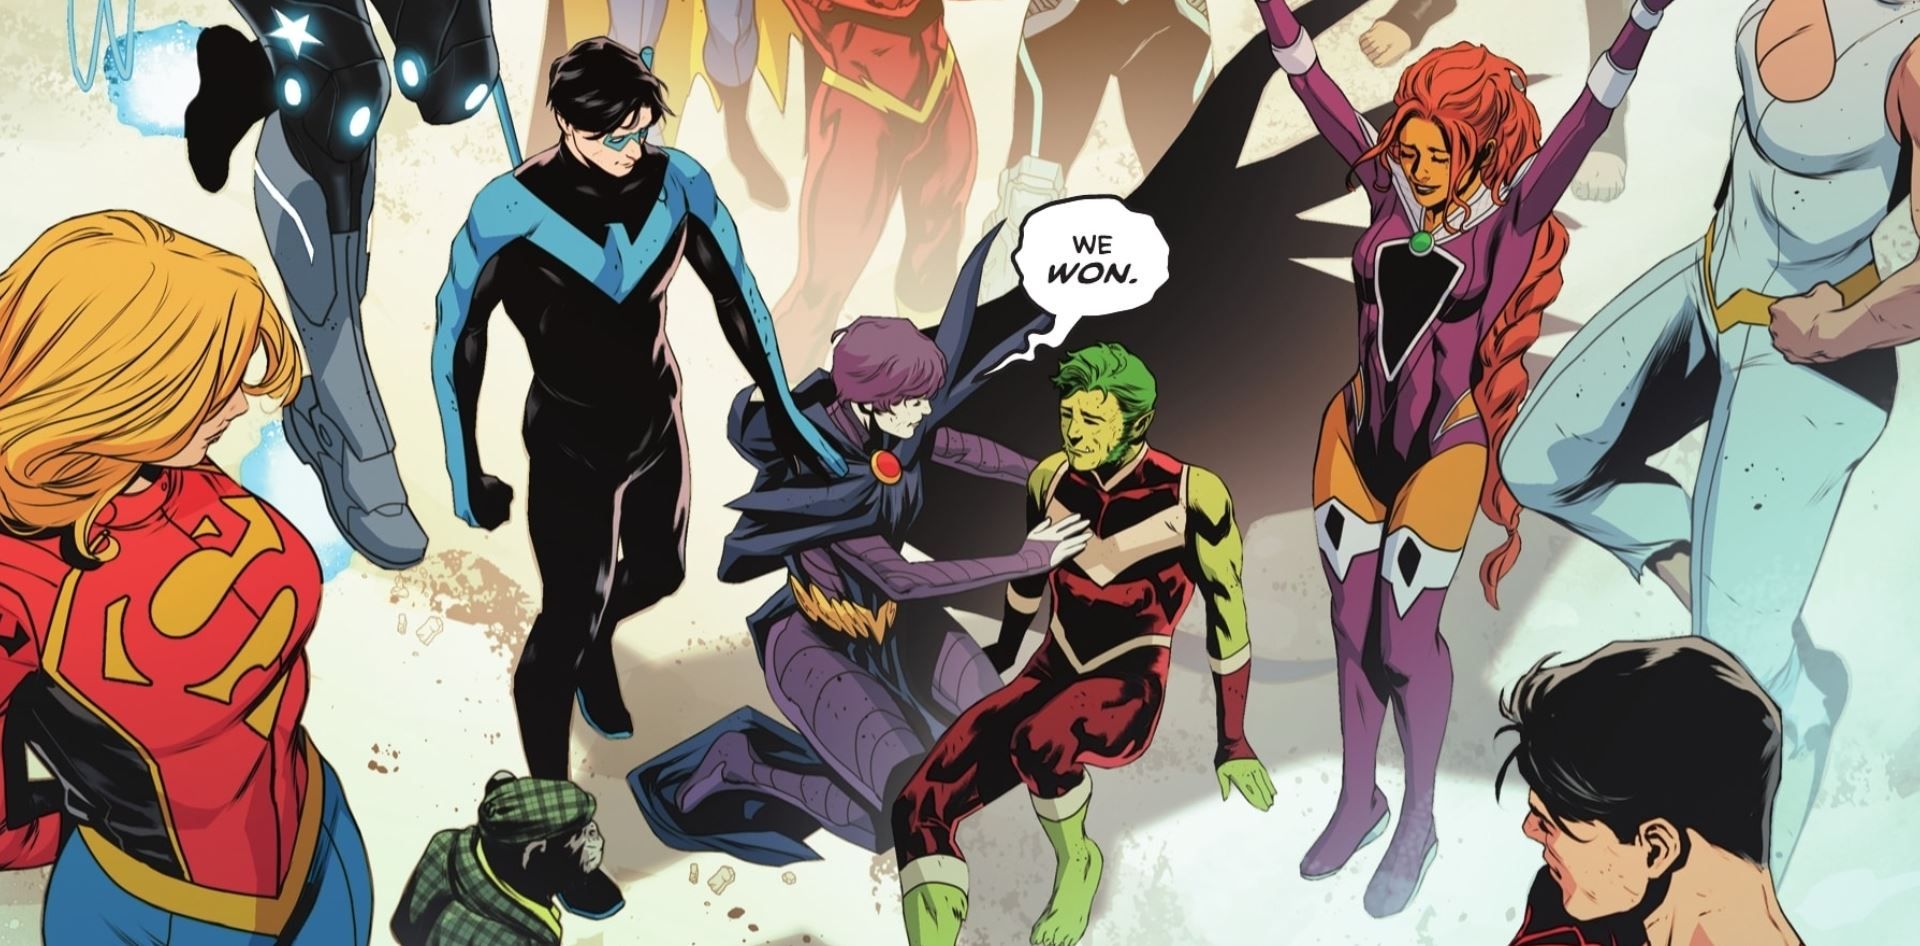 Beast Boy Survives: DC’s Beloved Titan Appears to Be Completely Unkillable